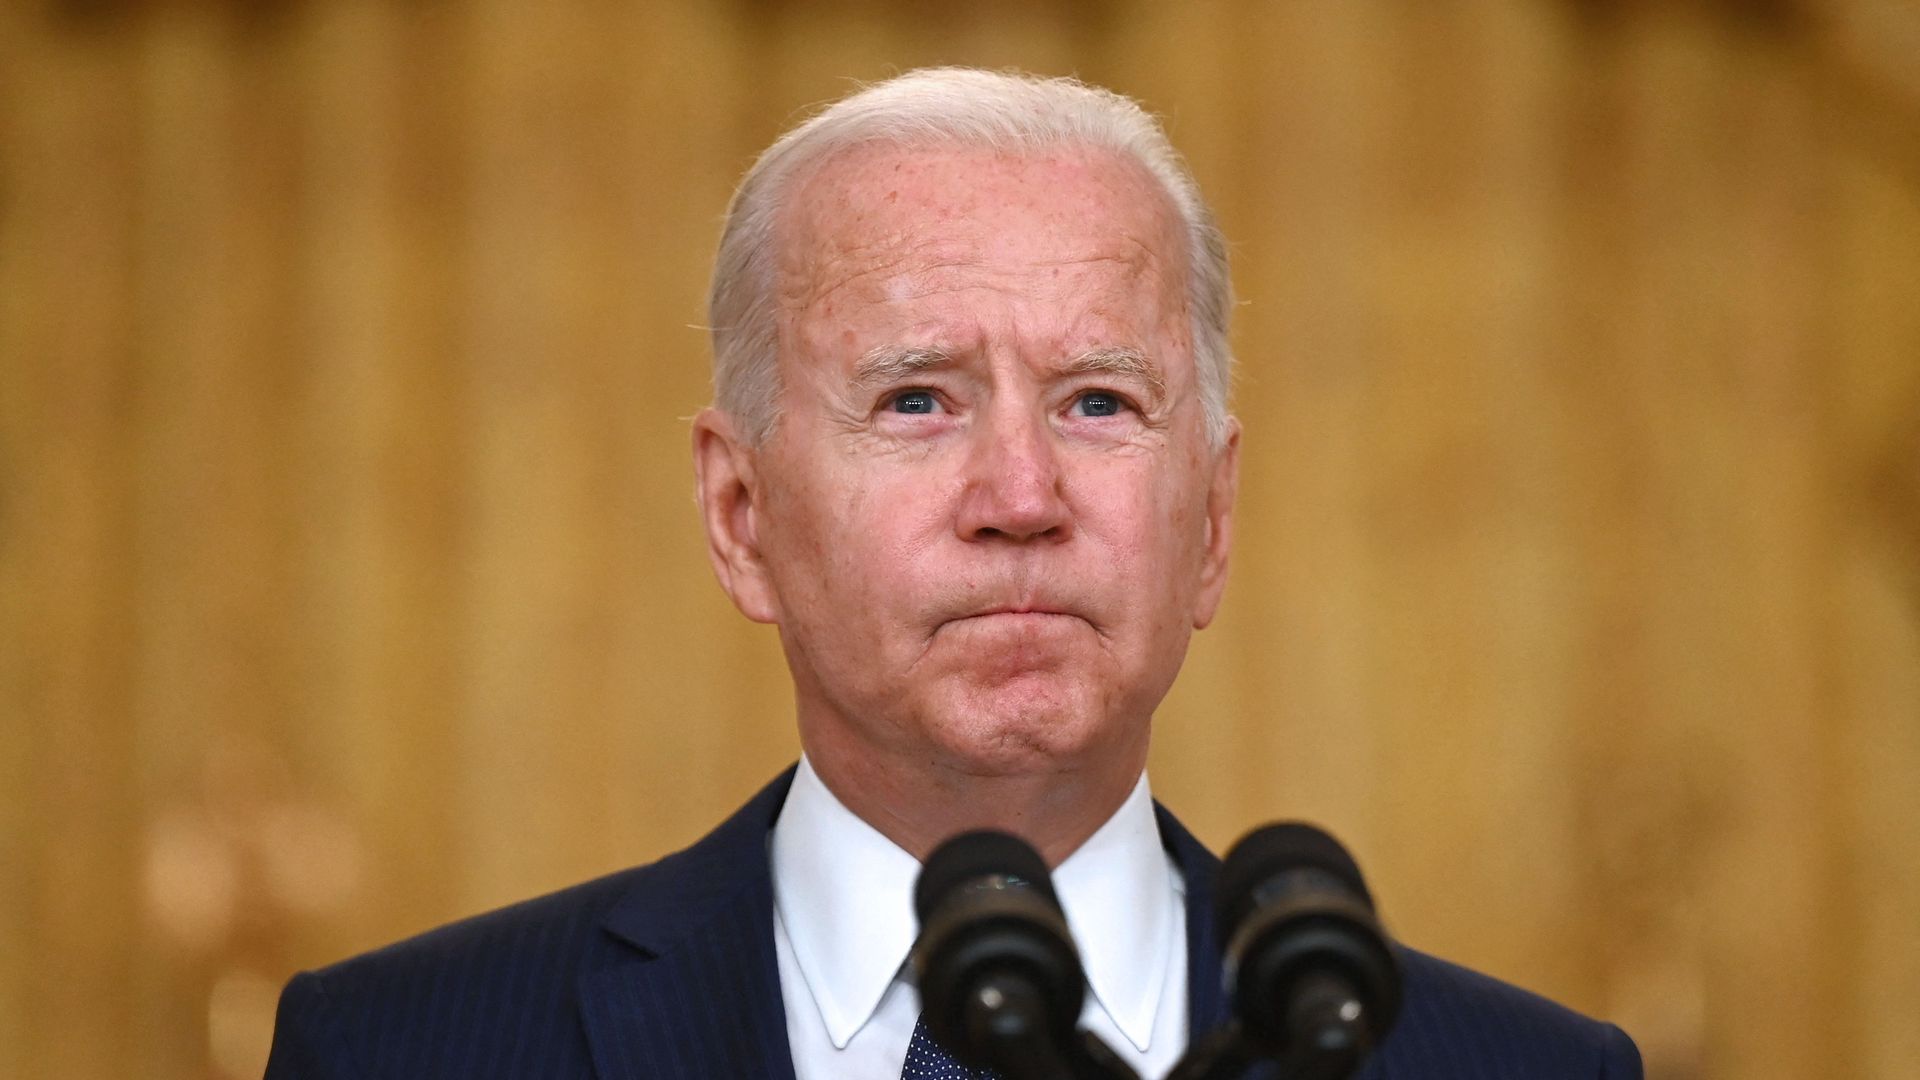 President Biden's lips are pursed as he stands before a microphone in a close-up shot